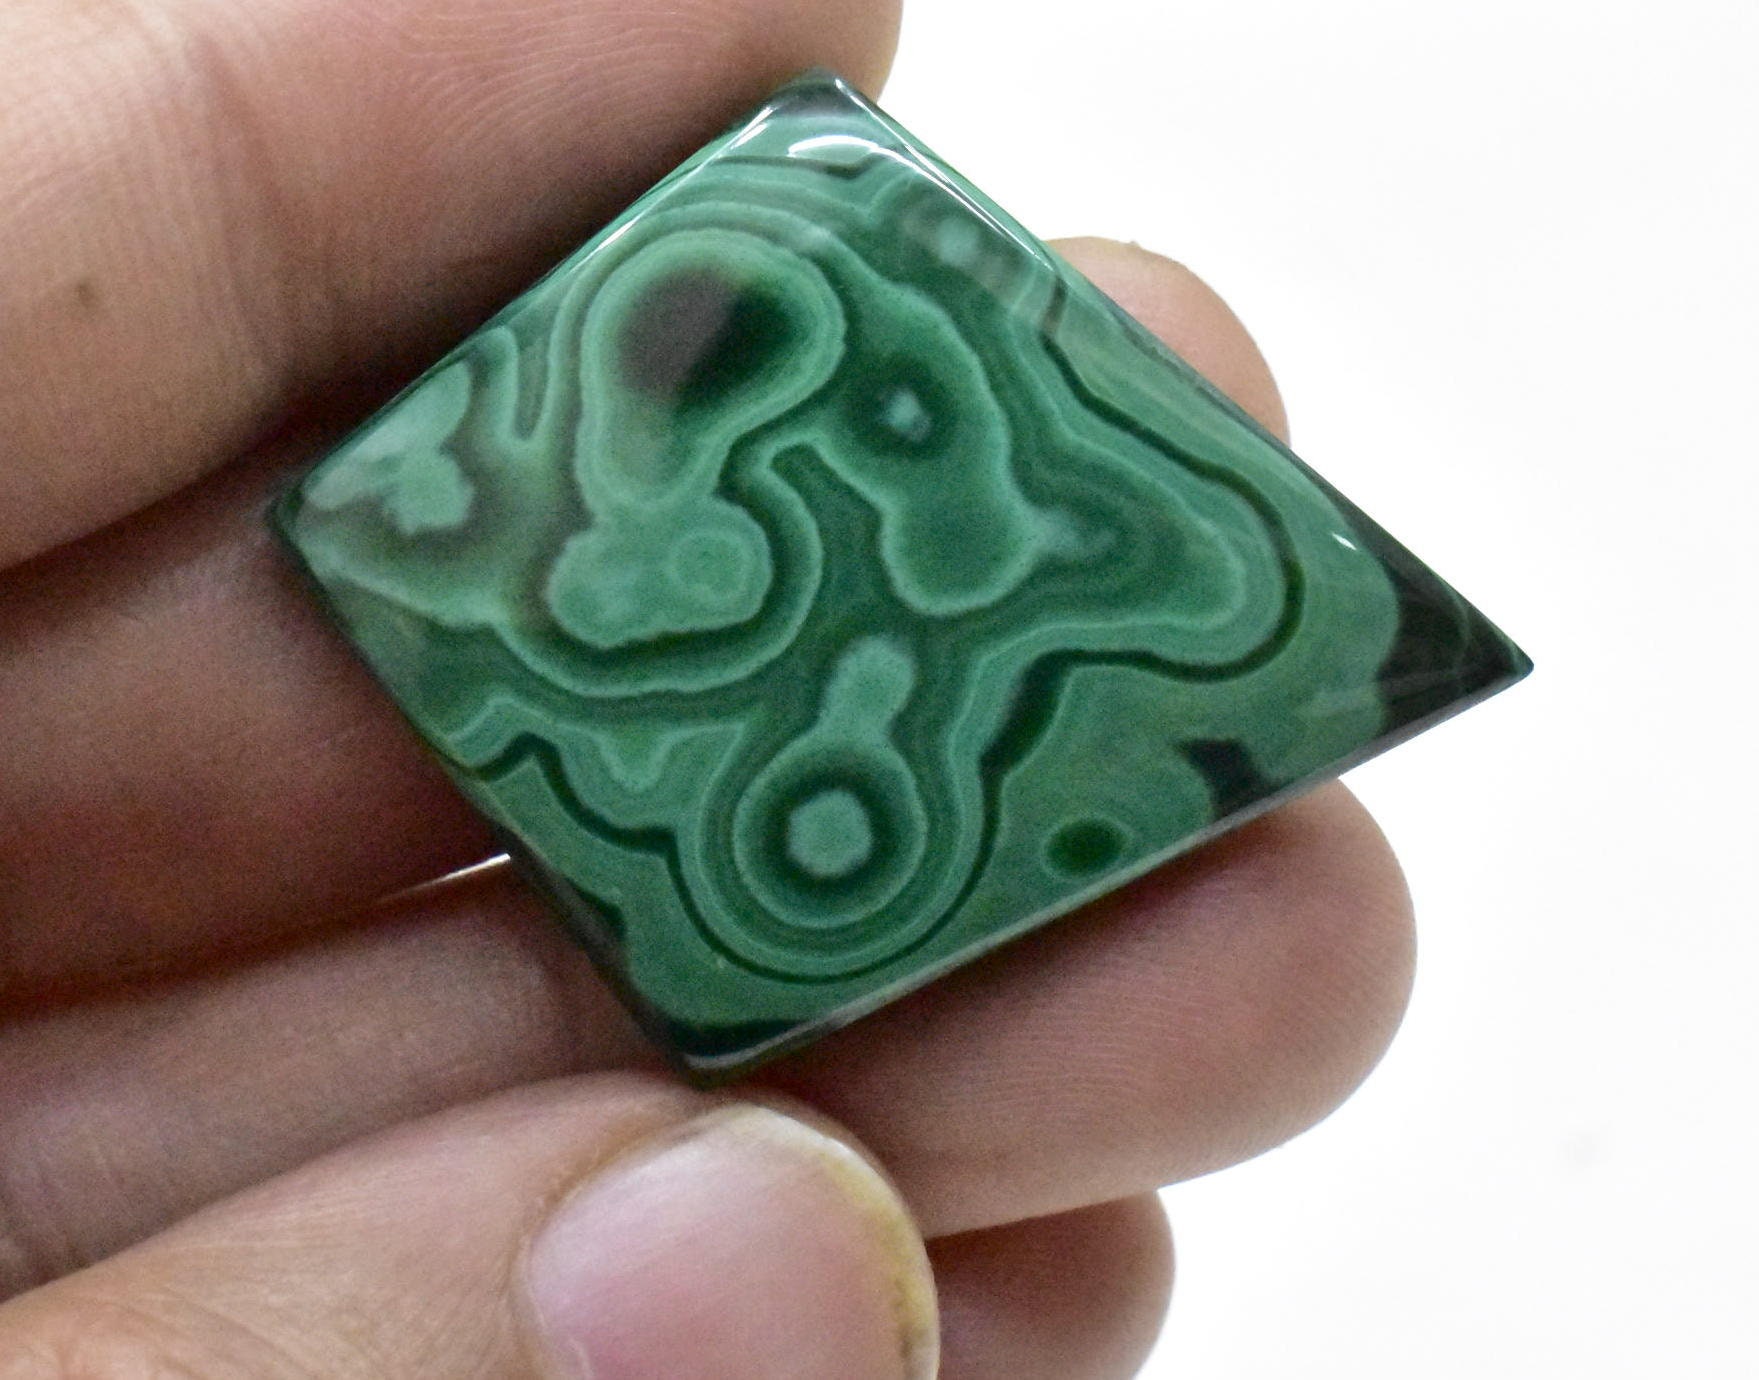 Natural Malachite Gemstone,Gemstone Cabochon,New Year Gift,Christmas Gift,Gift For Her,Mother’s Day Gift,Making For Jewellery,Gemstone Cab. | Save 33% - Rajasthan Living 13